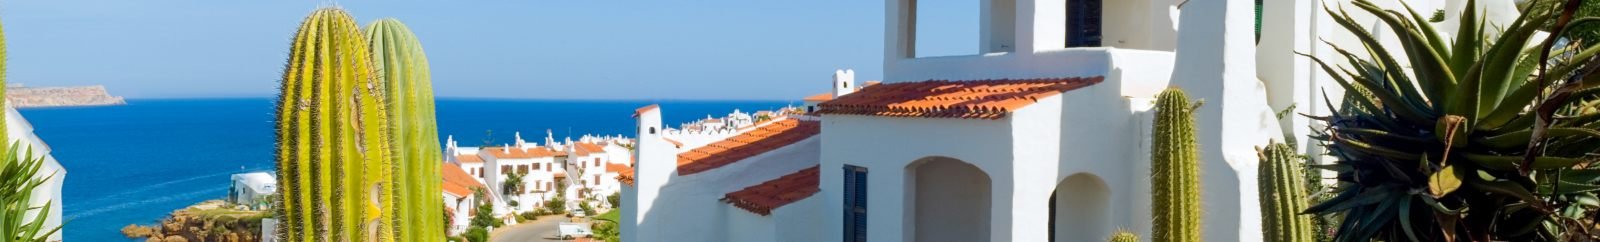 Top Tips for Finding the Perfect Holiday Home to Rent in Benalmadena